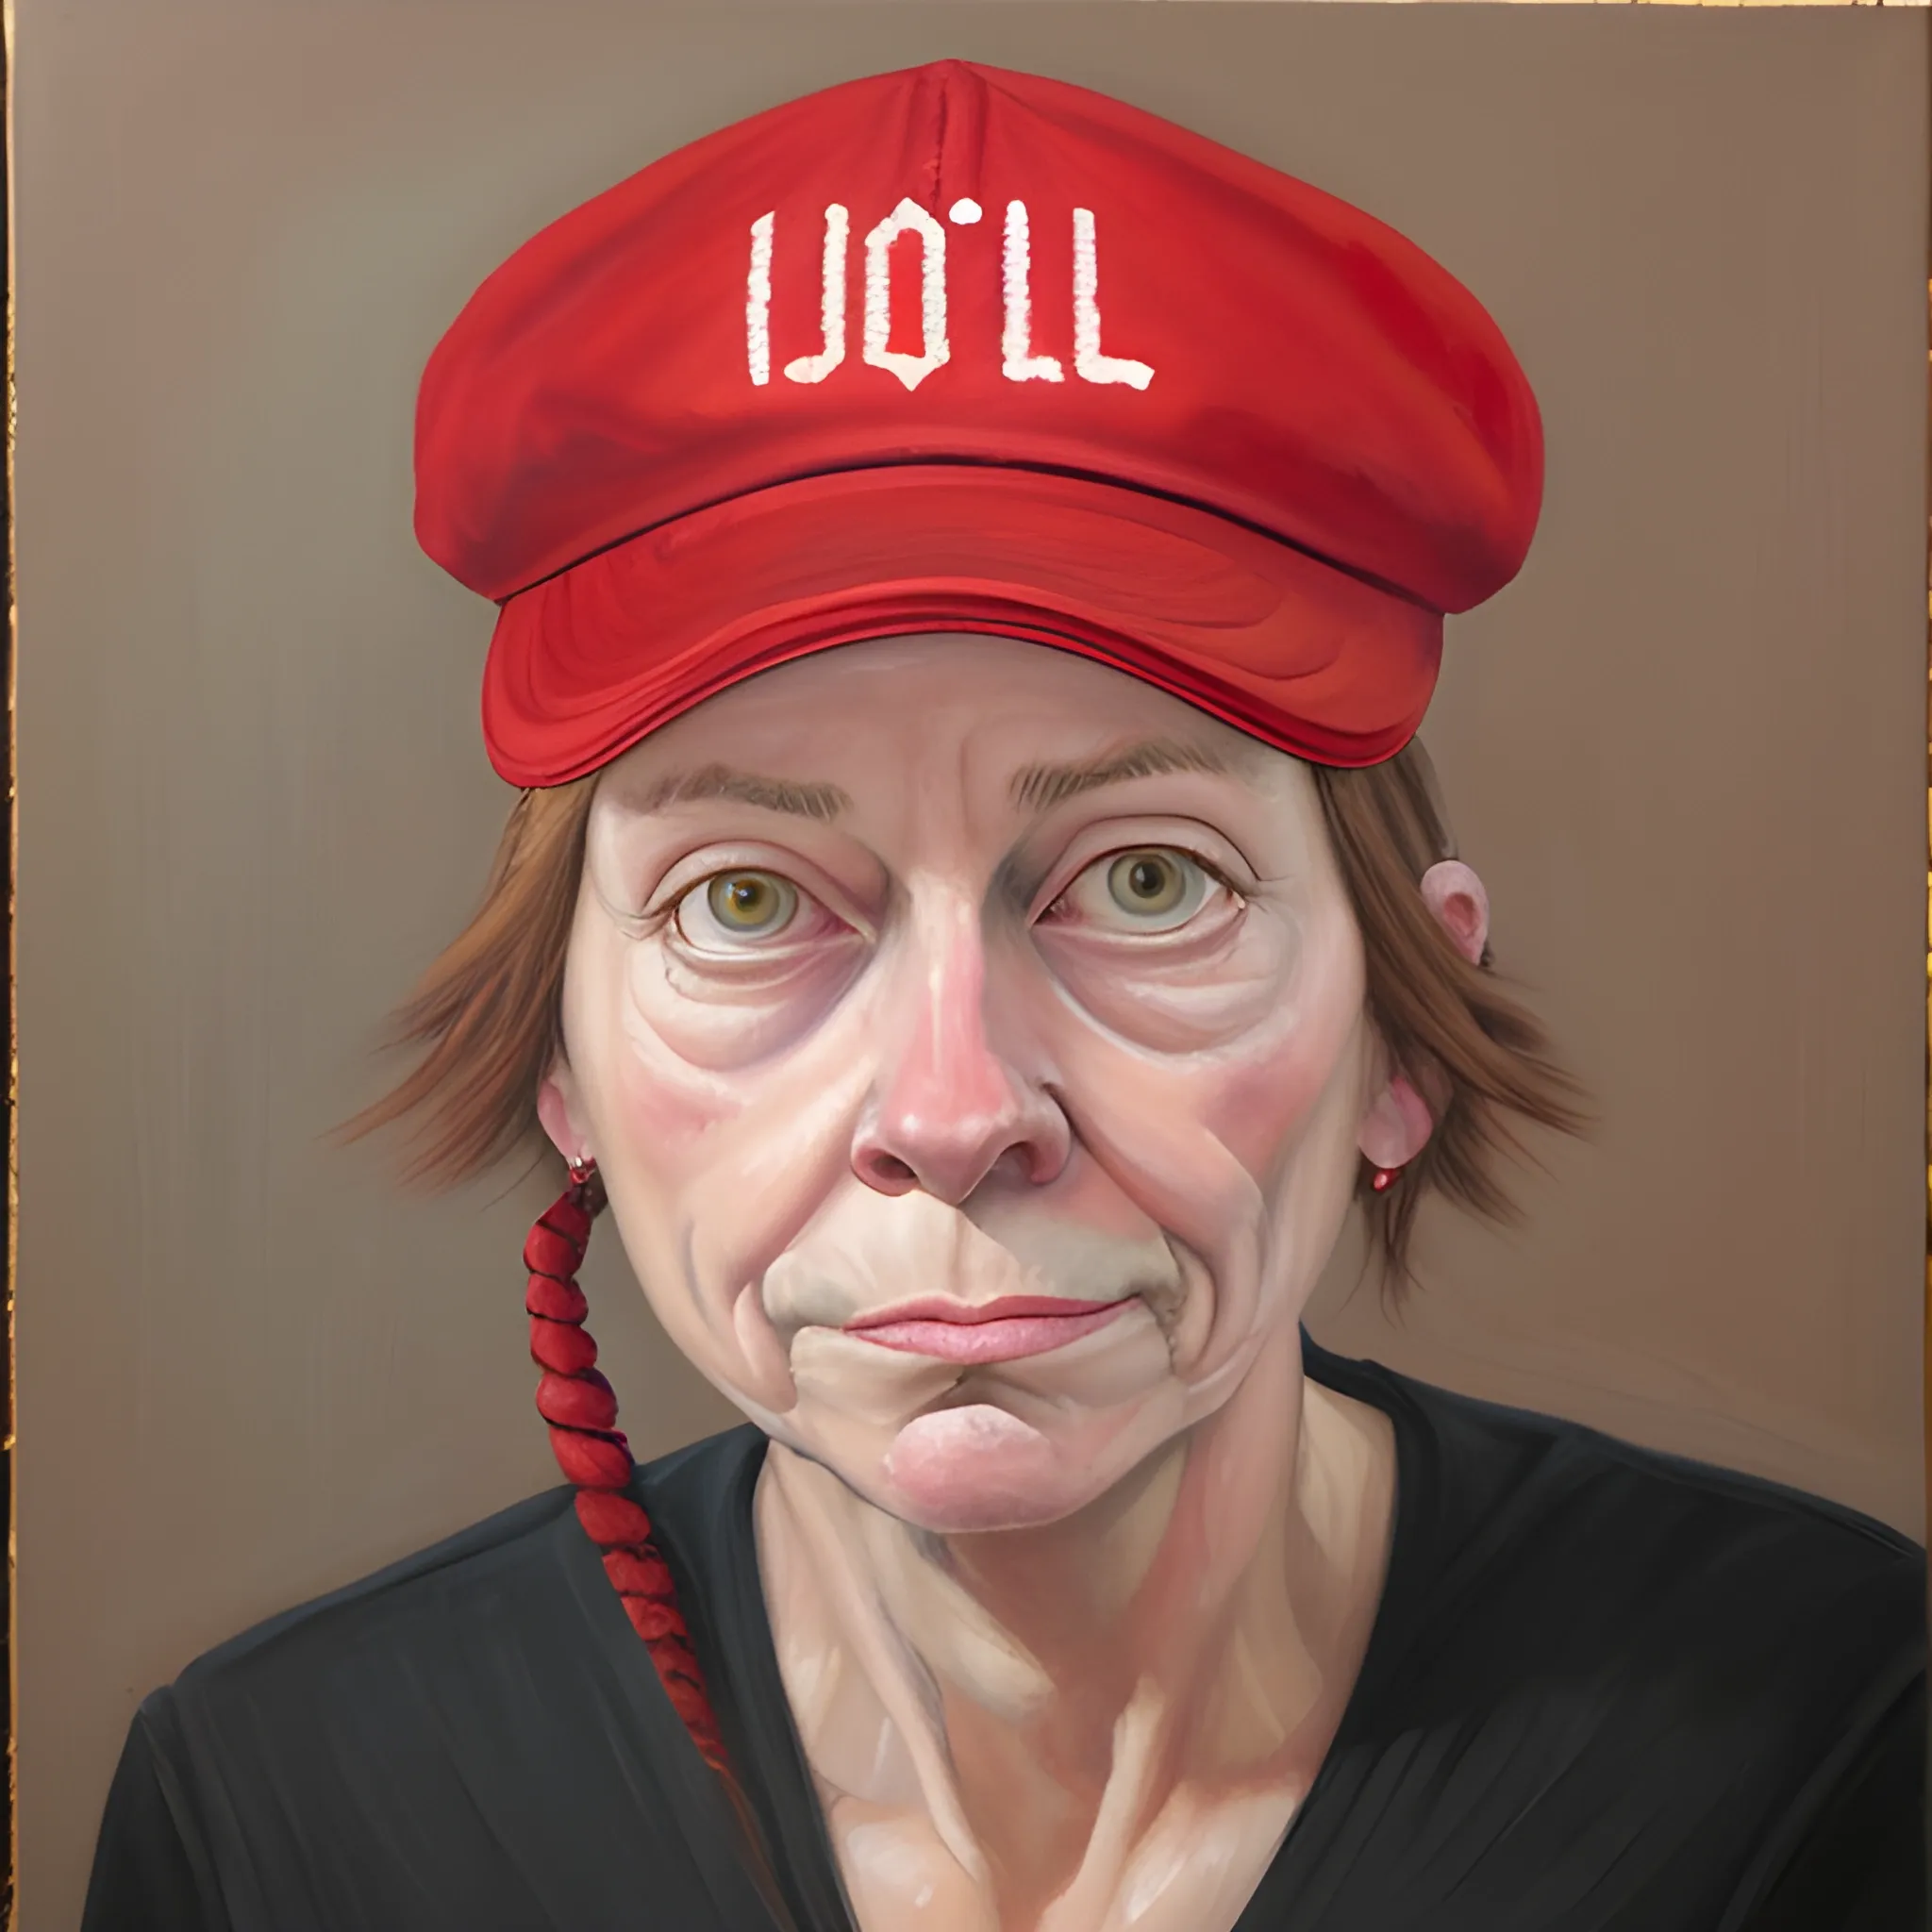  Oil Painting,
marjorie, ugly, dyke,red  maga hat 
